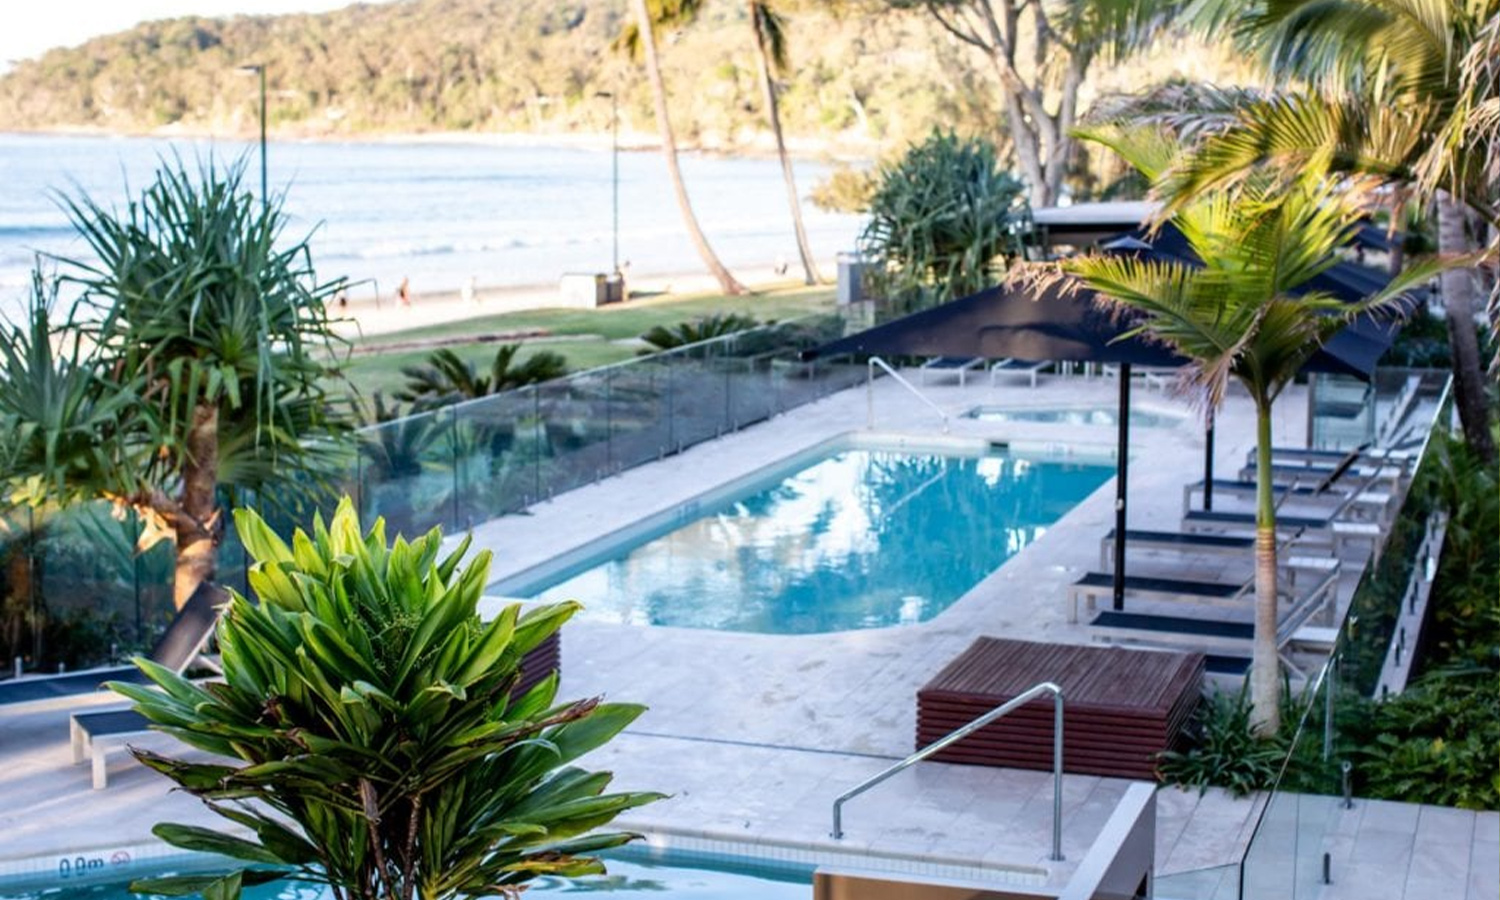 A view of the pool at Seahaven Noosa, one of the best accommodation options in Noosa.